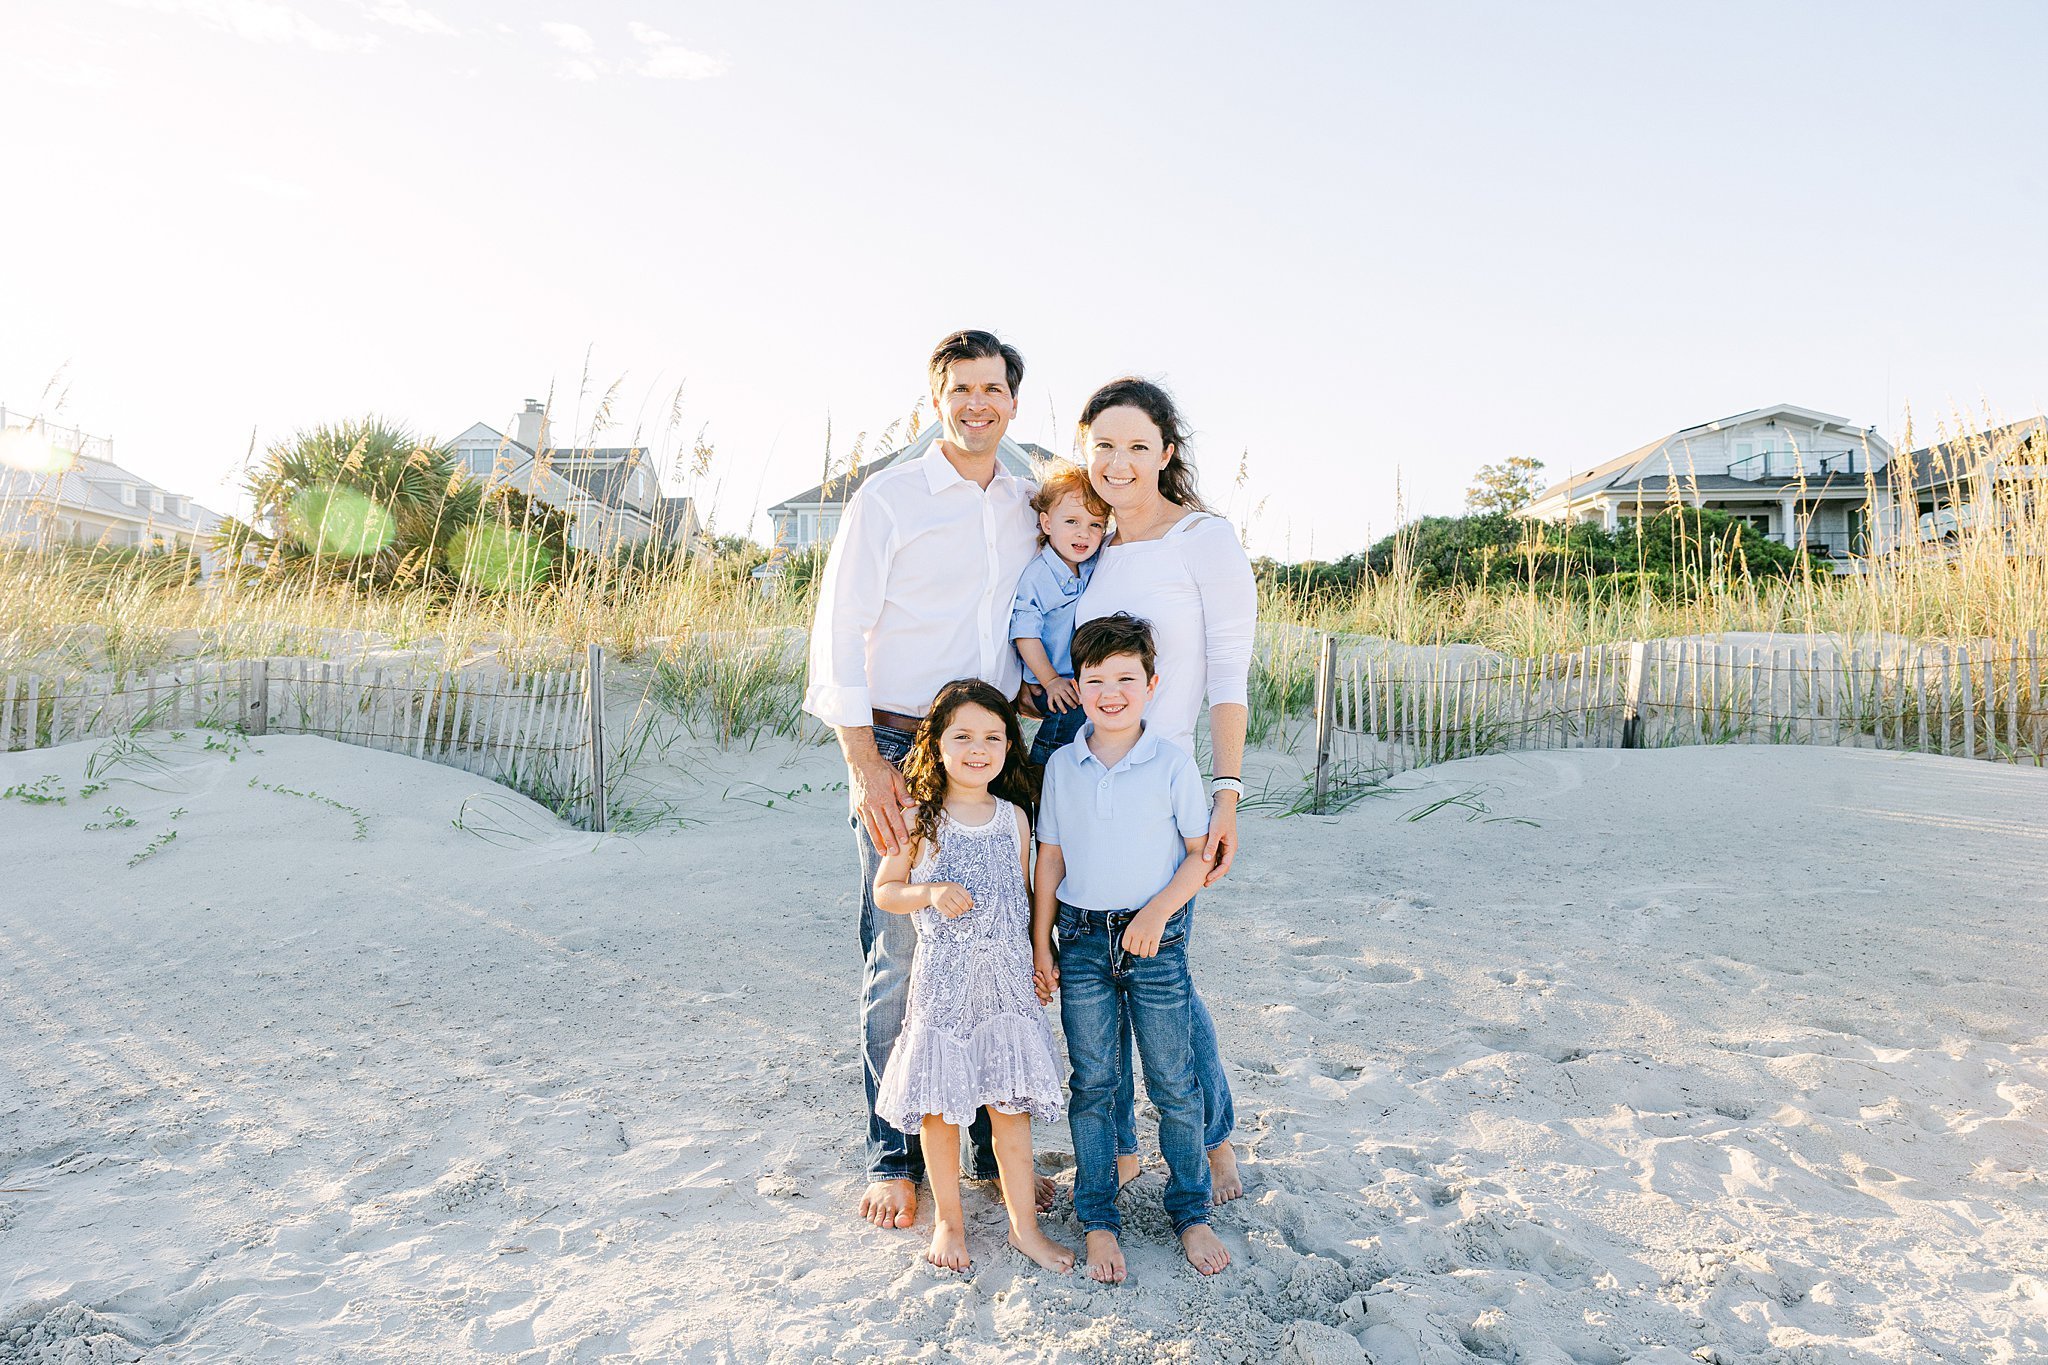 Katherine_Ives_Photography_Chod_Hilton_Head_Extended_Family_Session_82.JPG